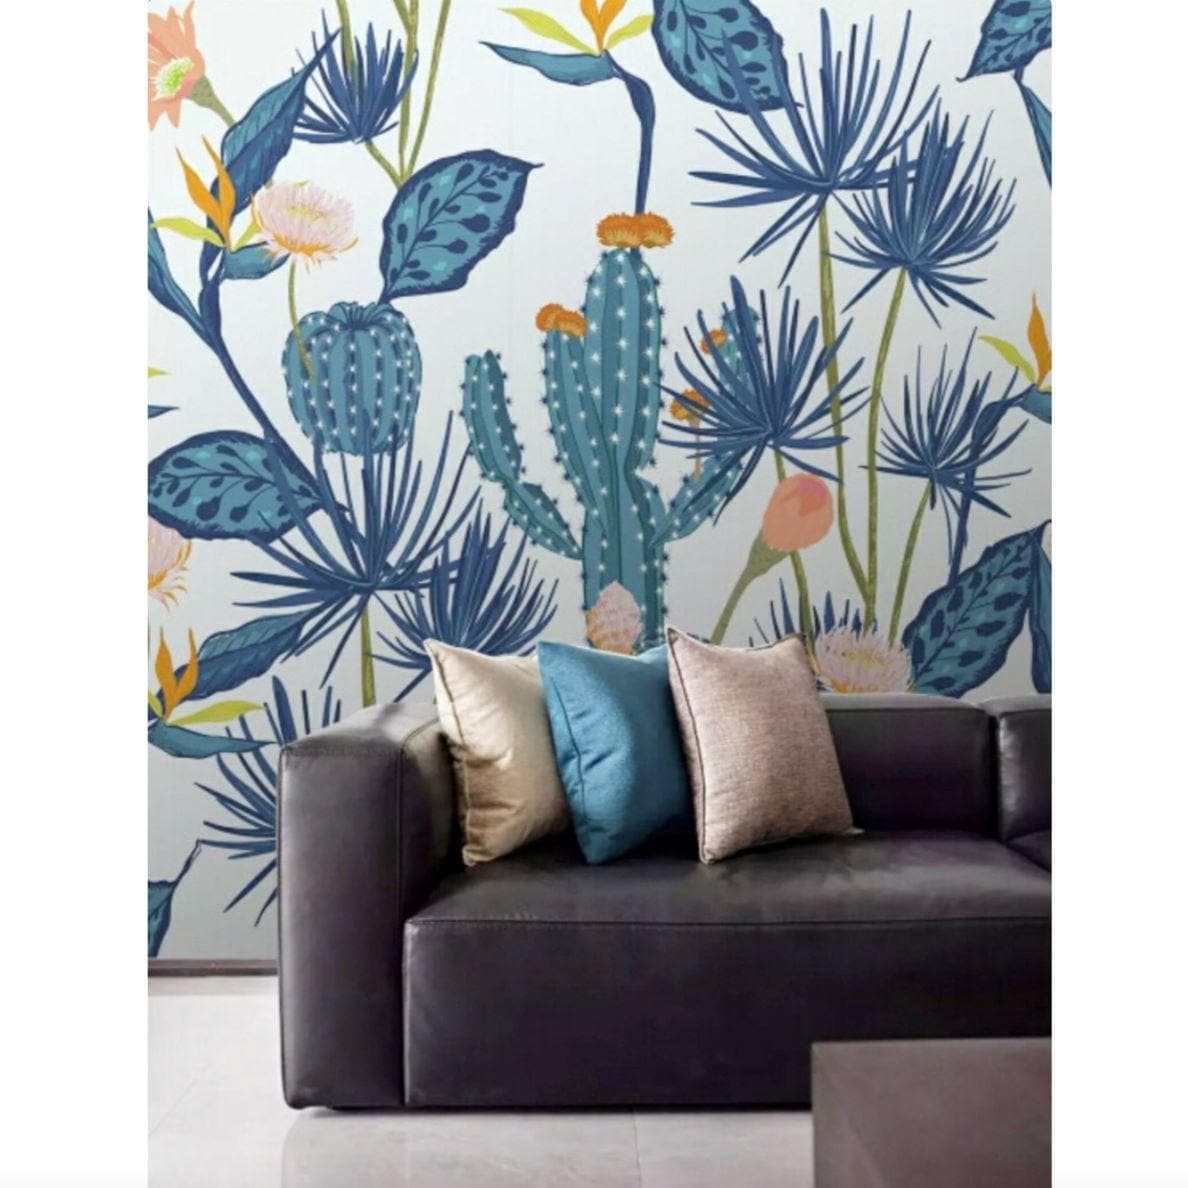 Blue Cactus and Flowers Wall Mural - MAIA HOMES